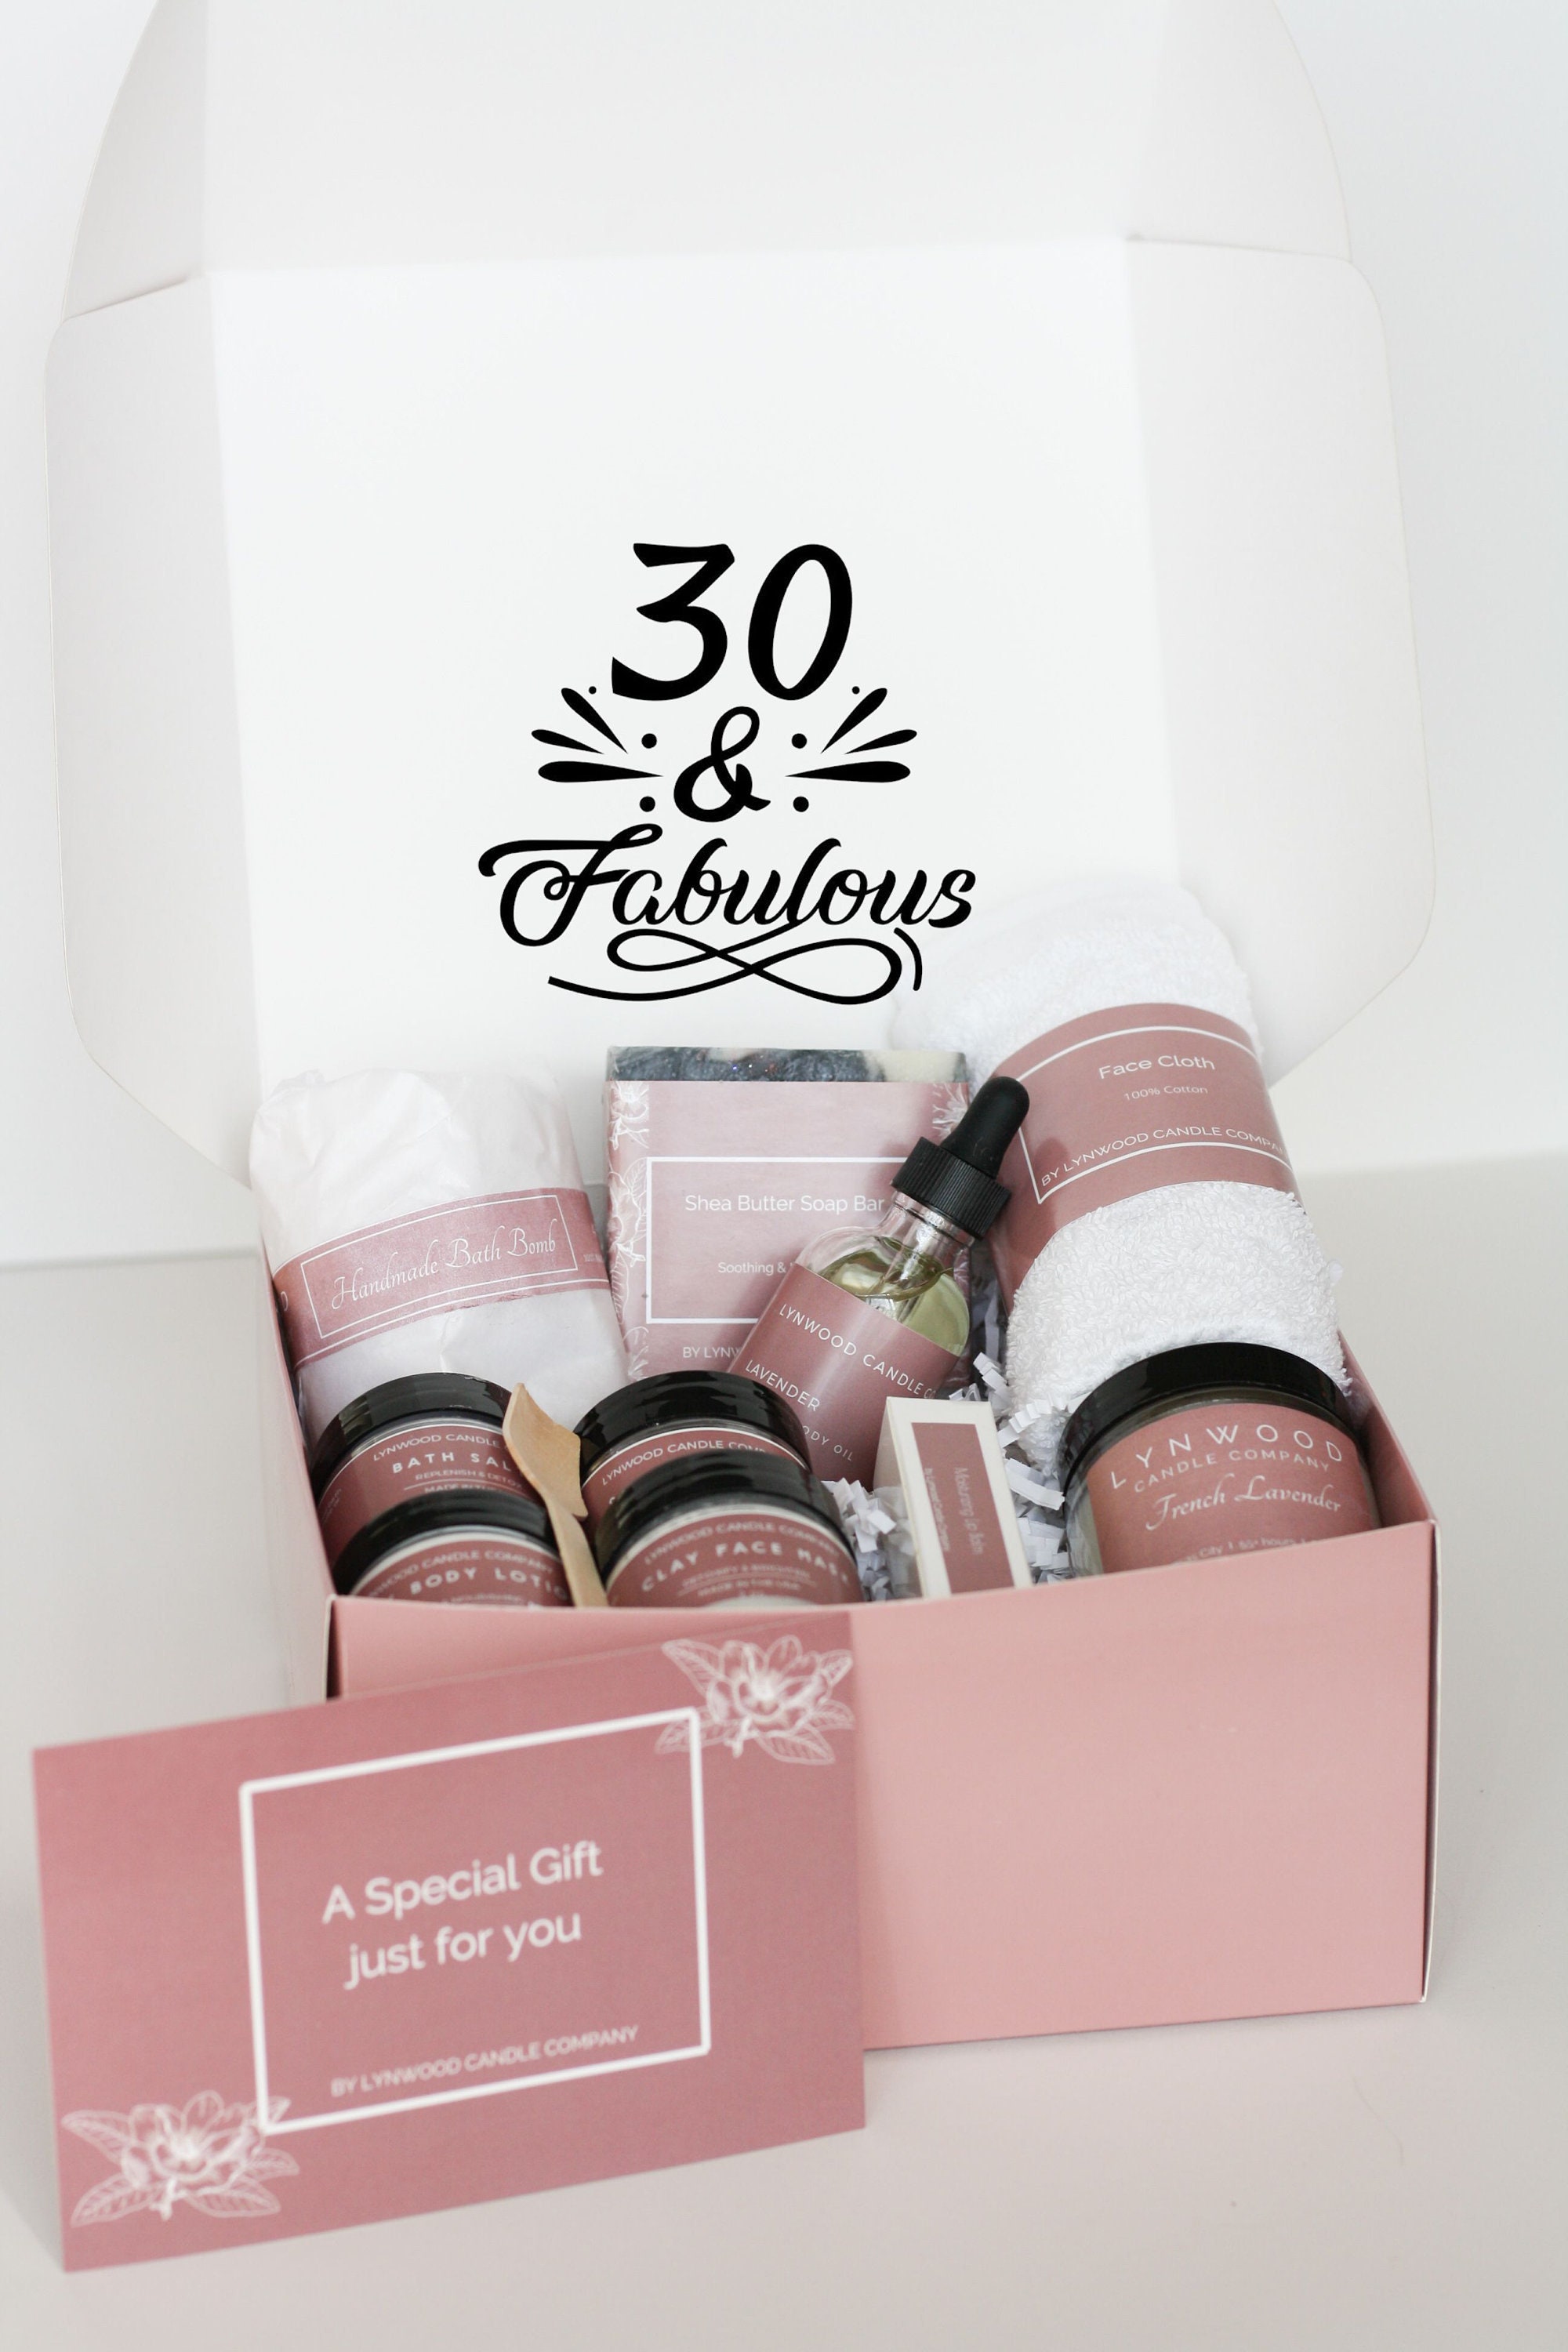 30 Small Gifts Ideas for 30th Birthday